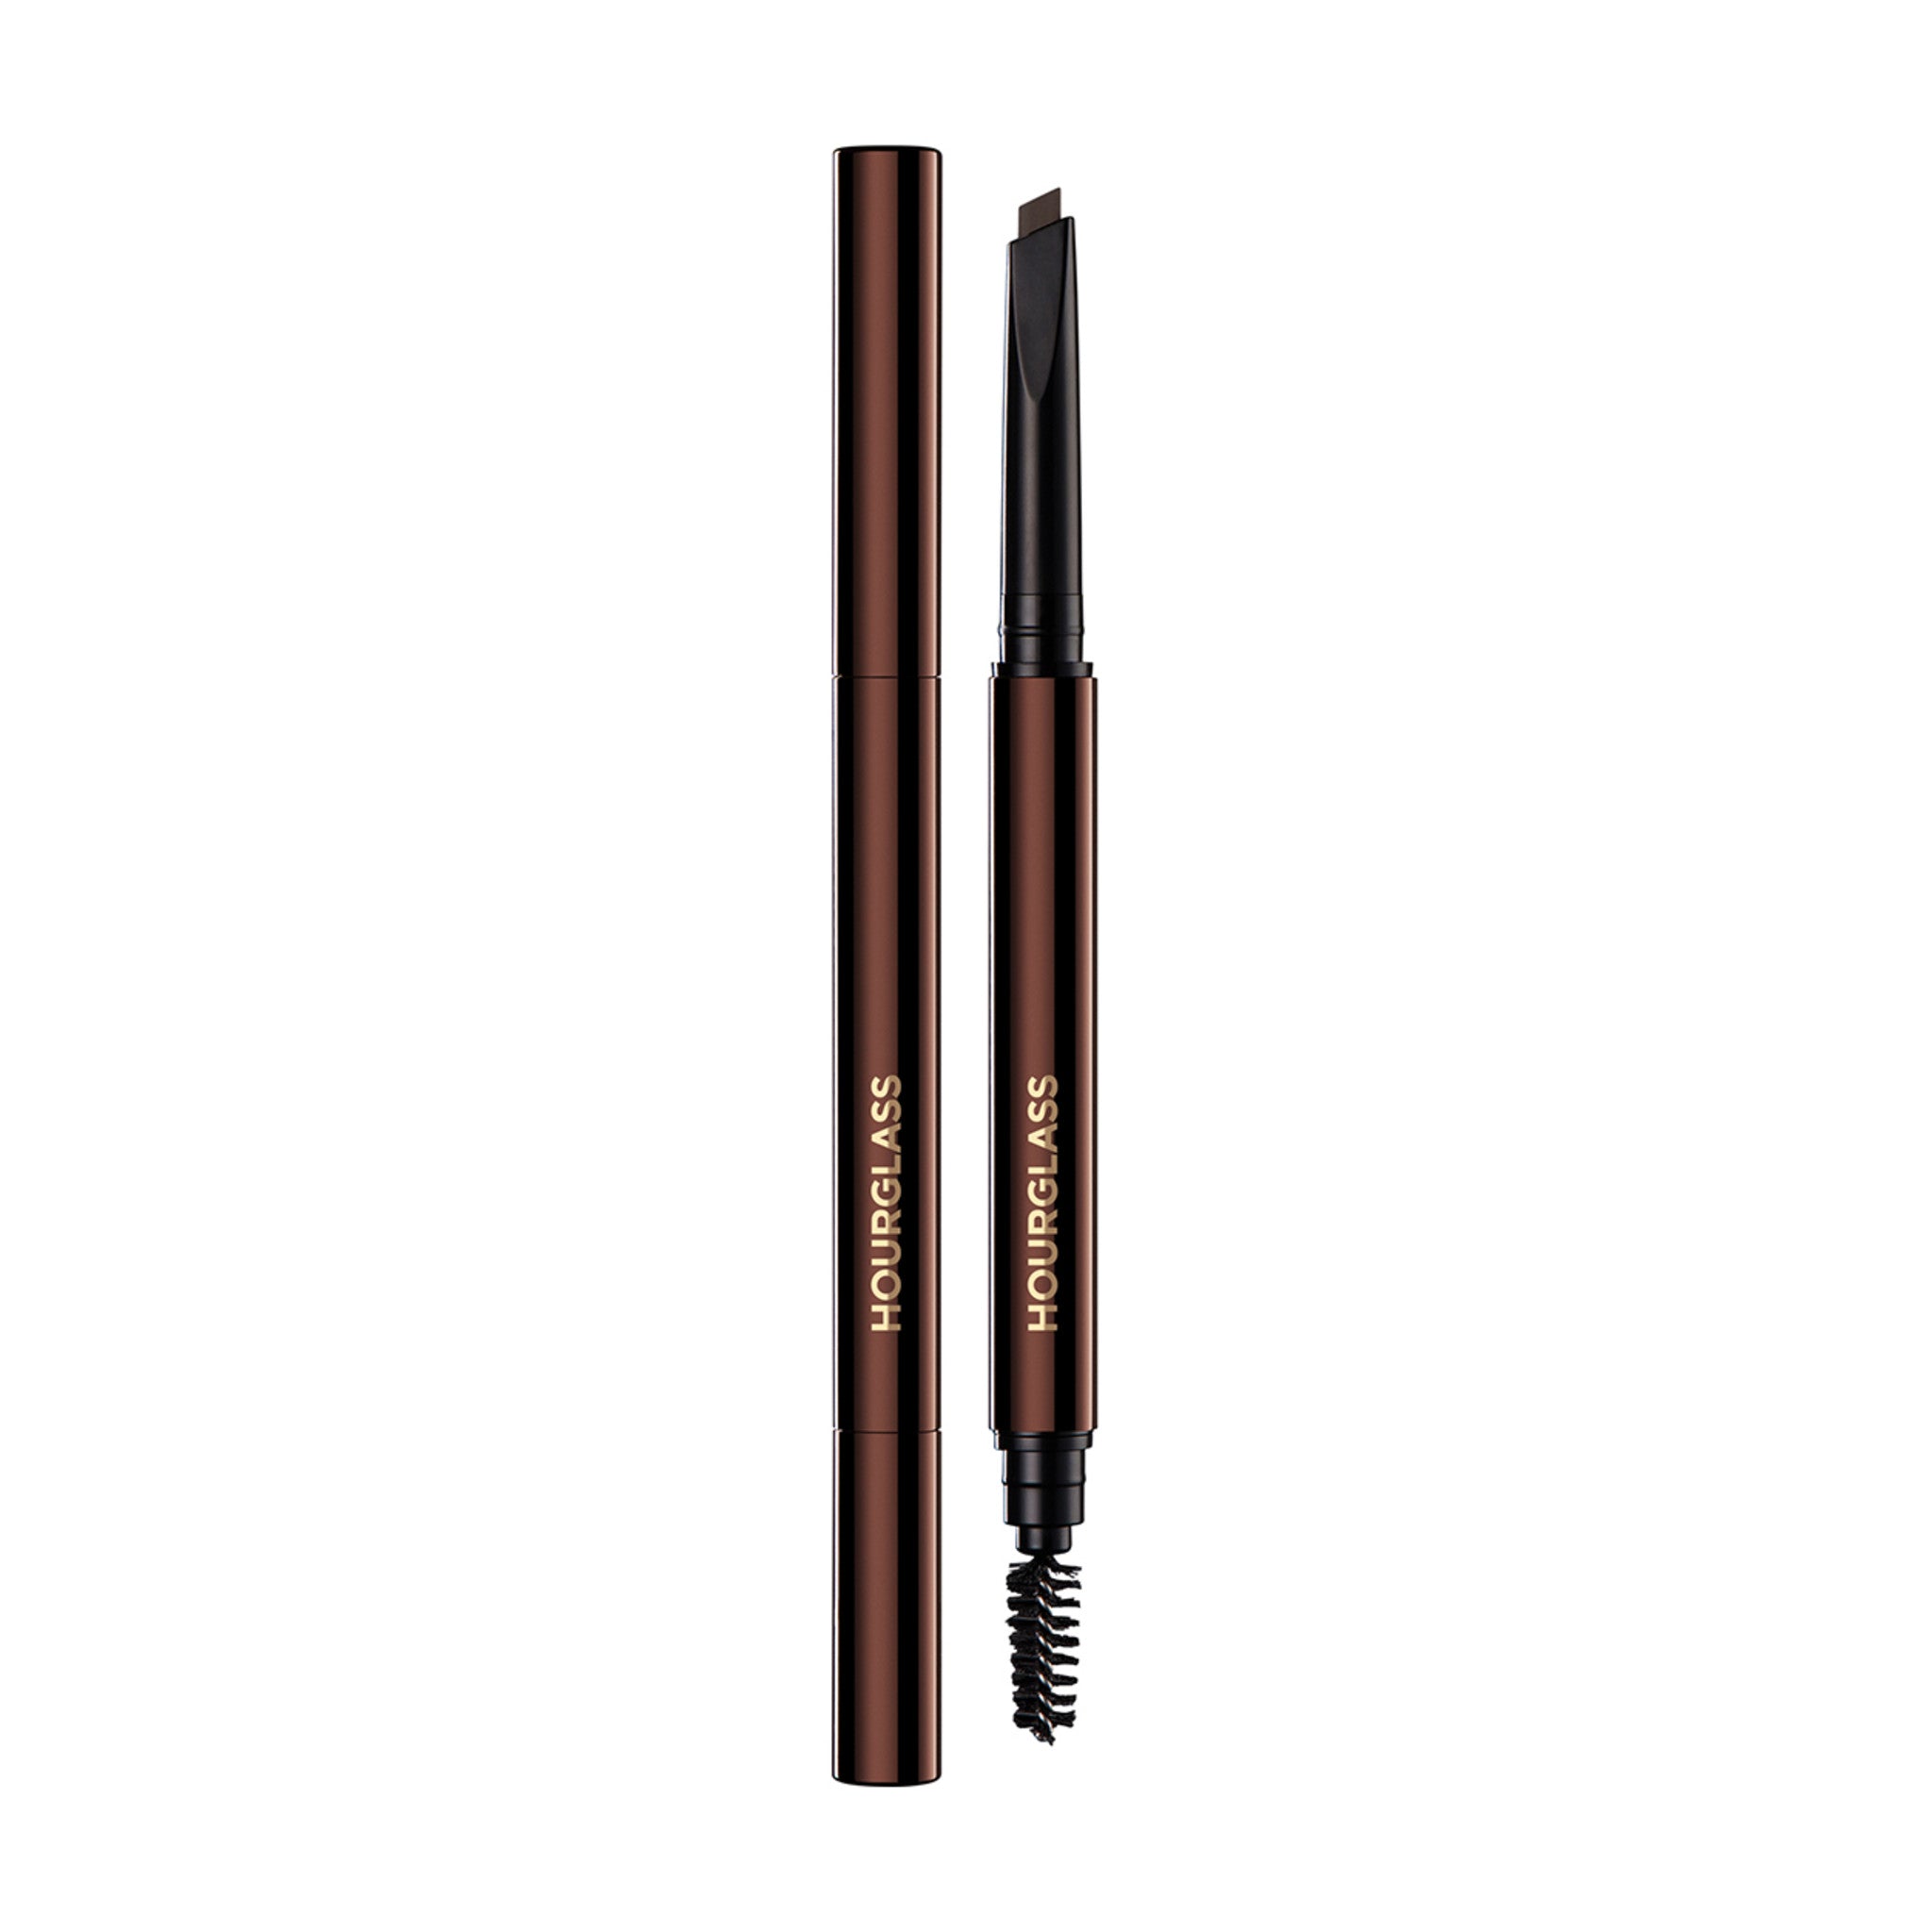 Hourglass Arch Brow Sculpting Pencil Color/Shade variant: Dark Brunette main image. This product is in the color brown